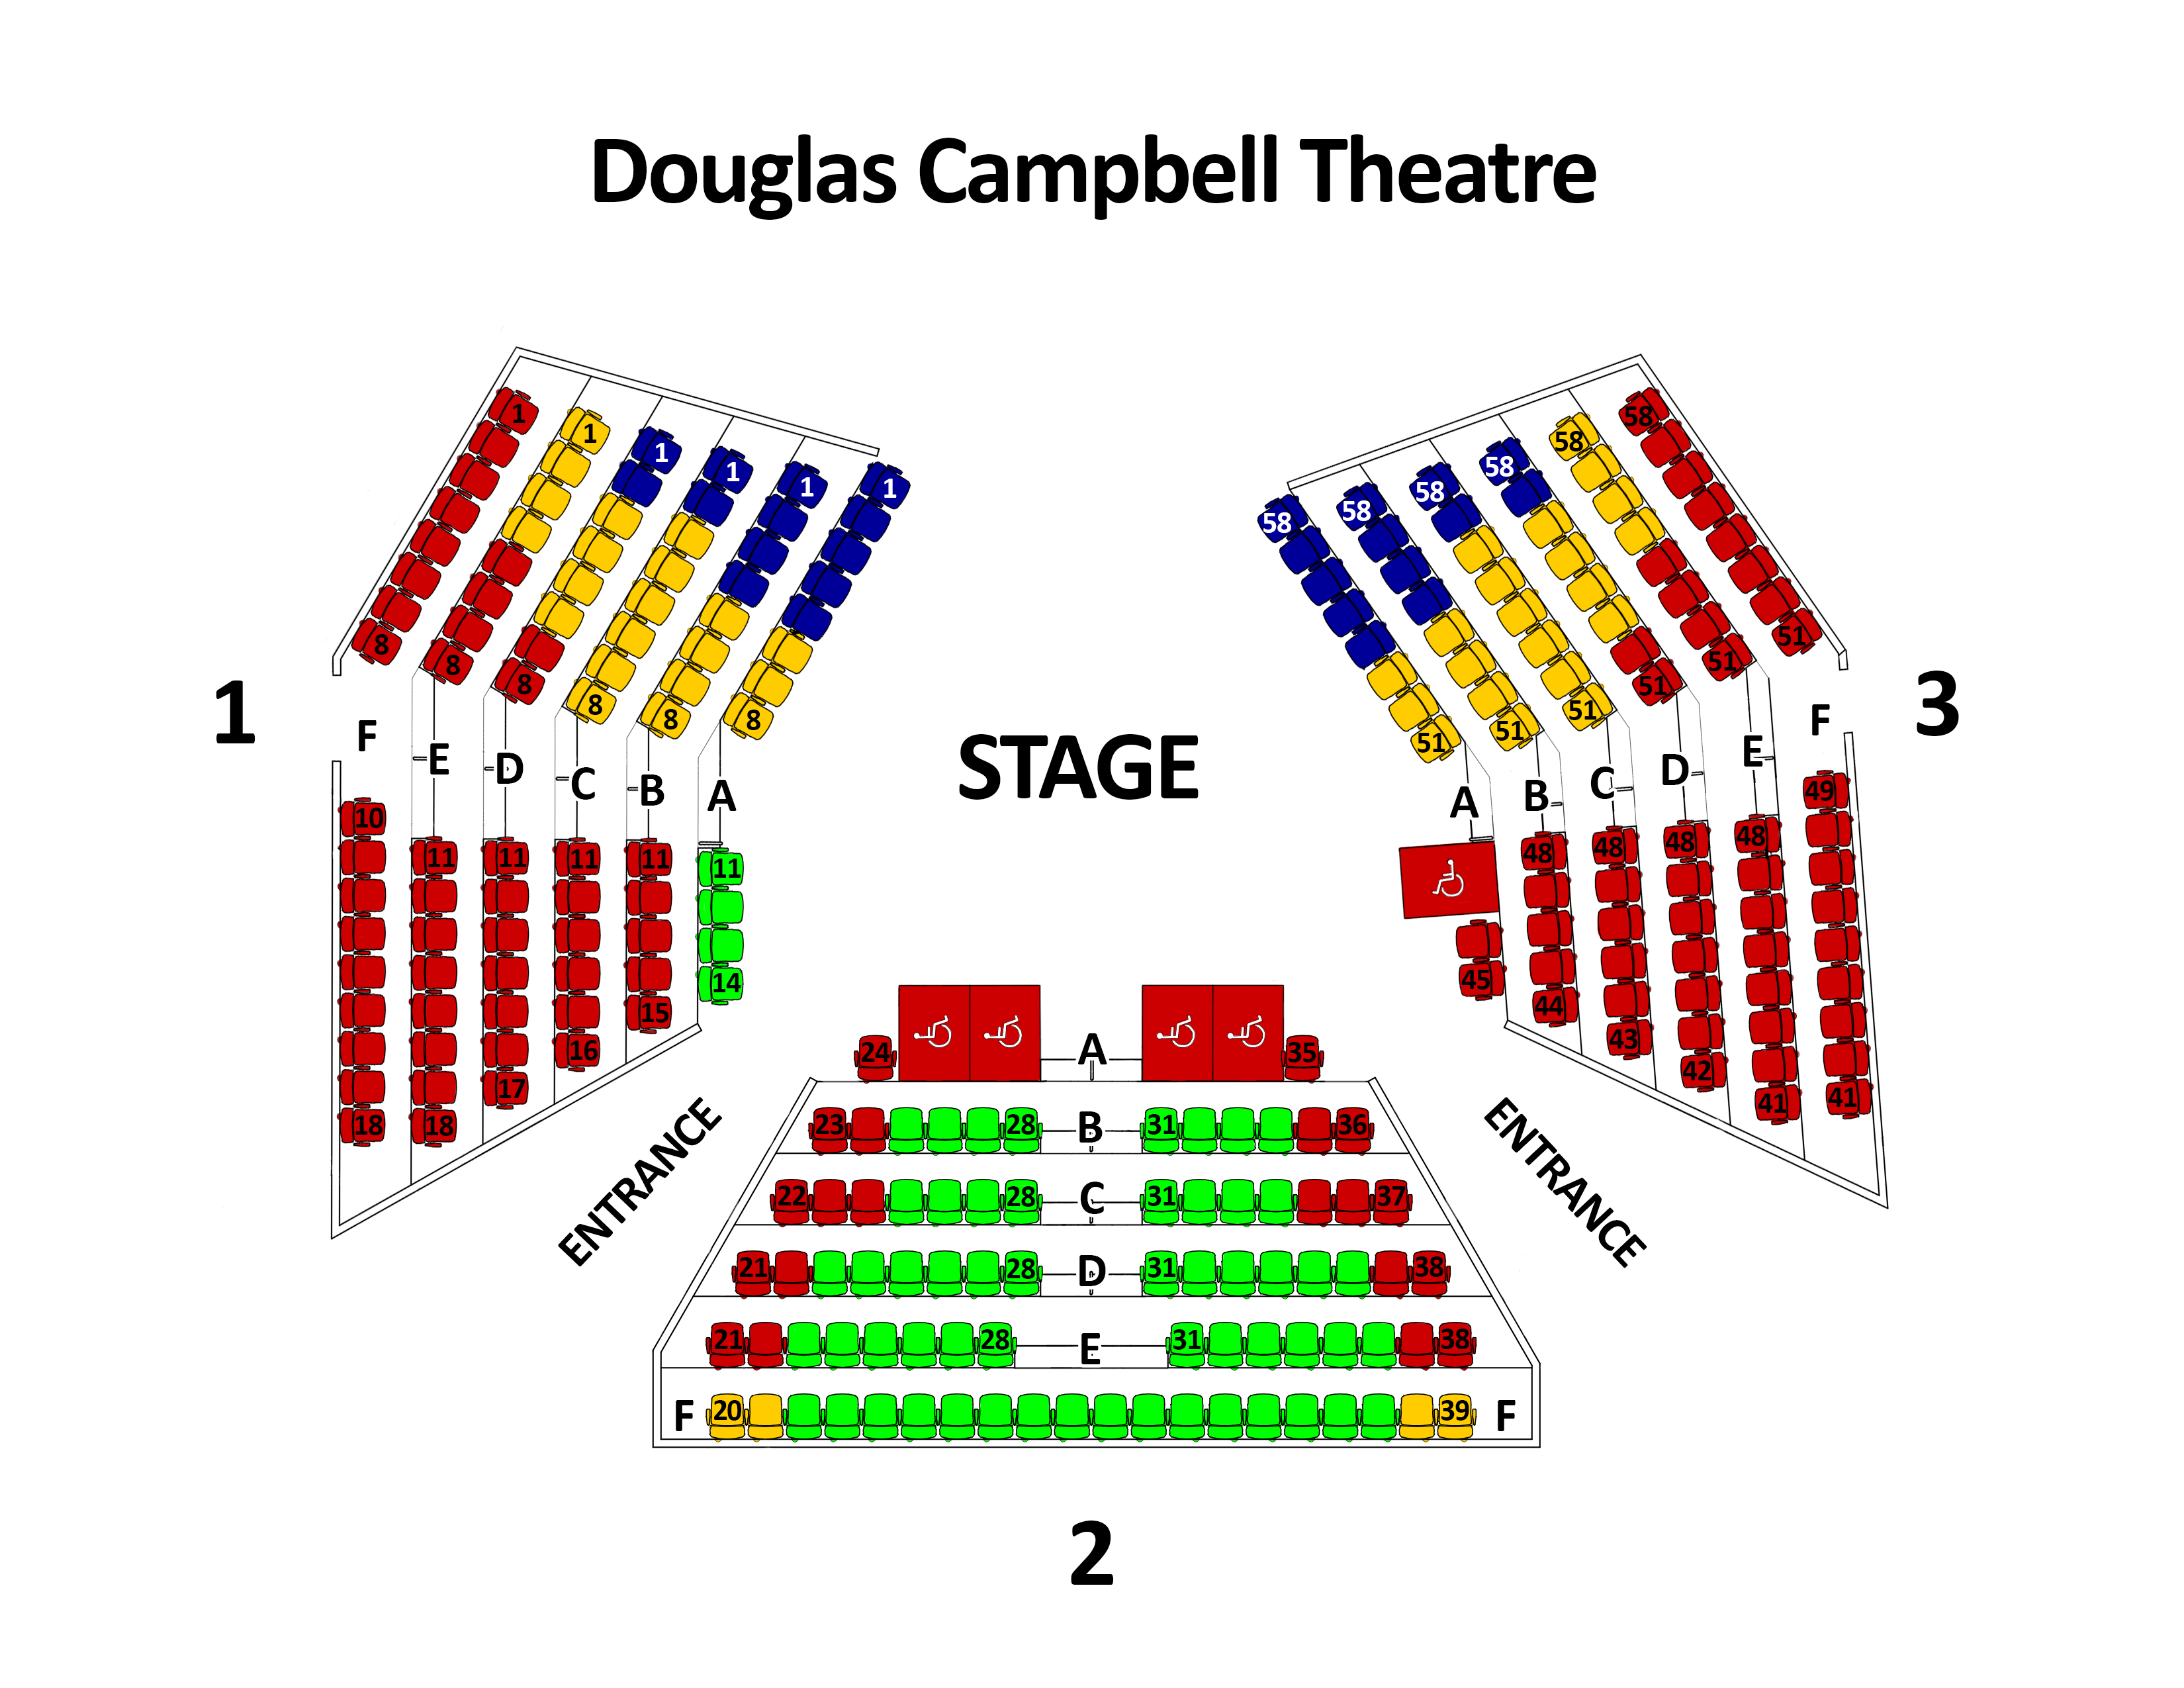 Howard Family Stage Seating map. Seating Zones visually represented by colour coding